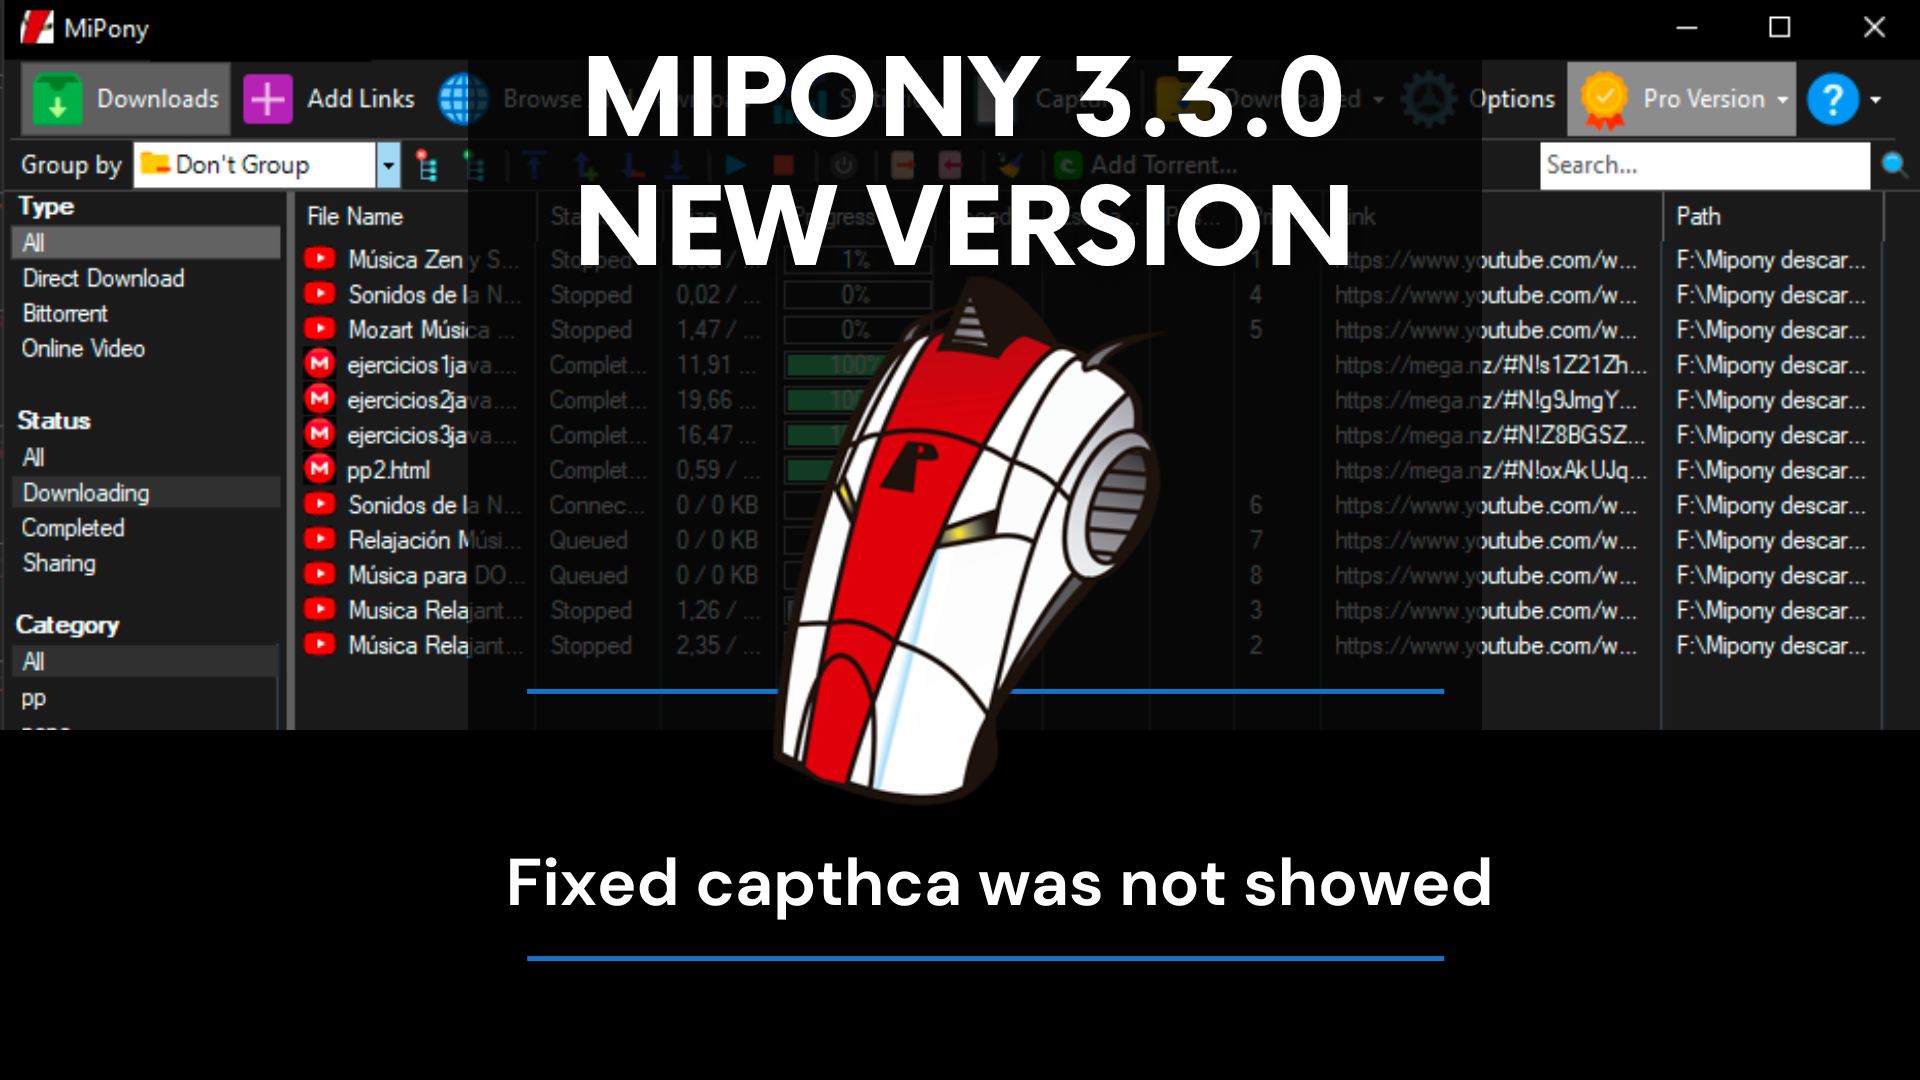 Mipony Pro 3.3.0 download the new version for iphone